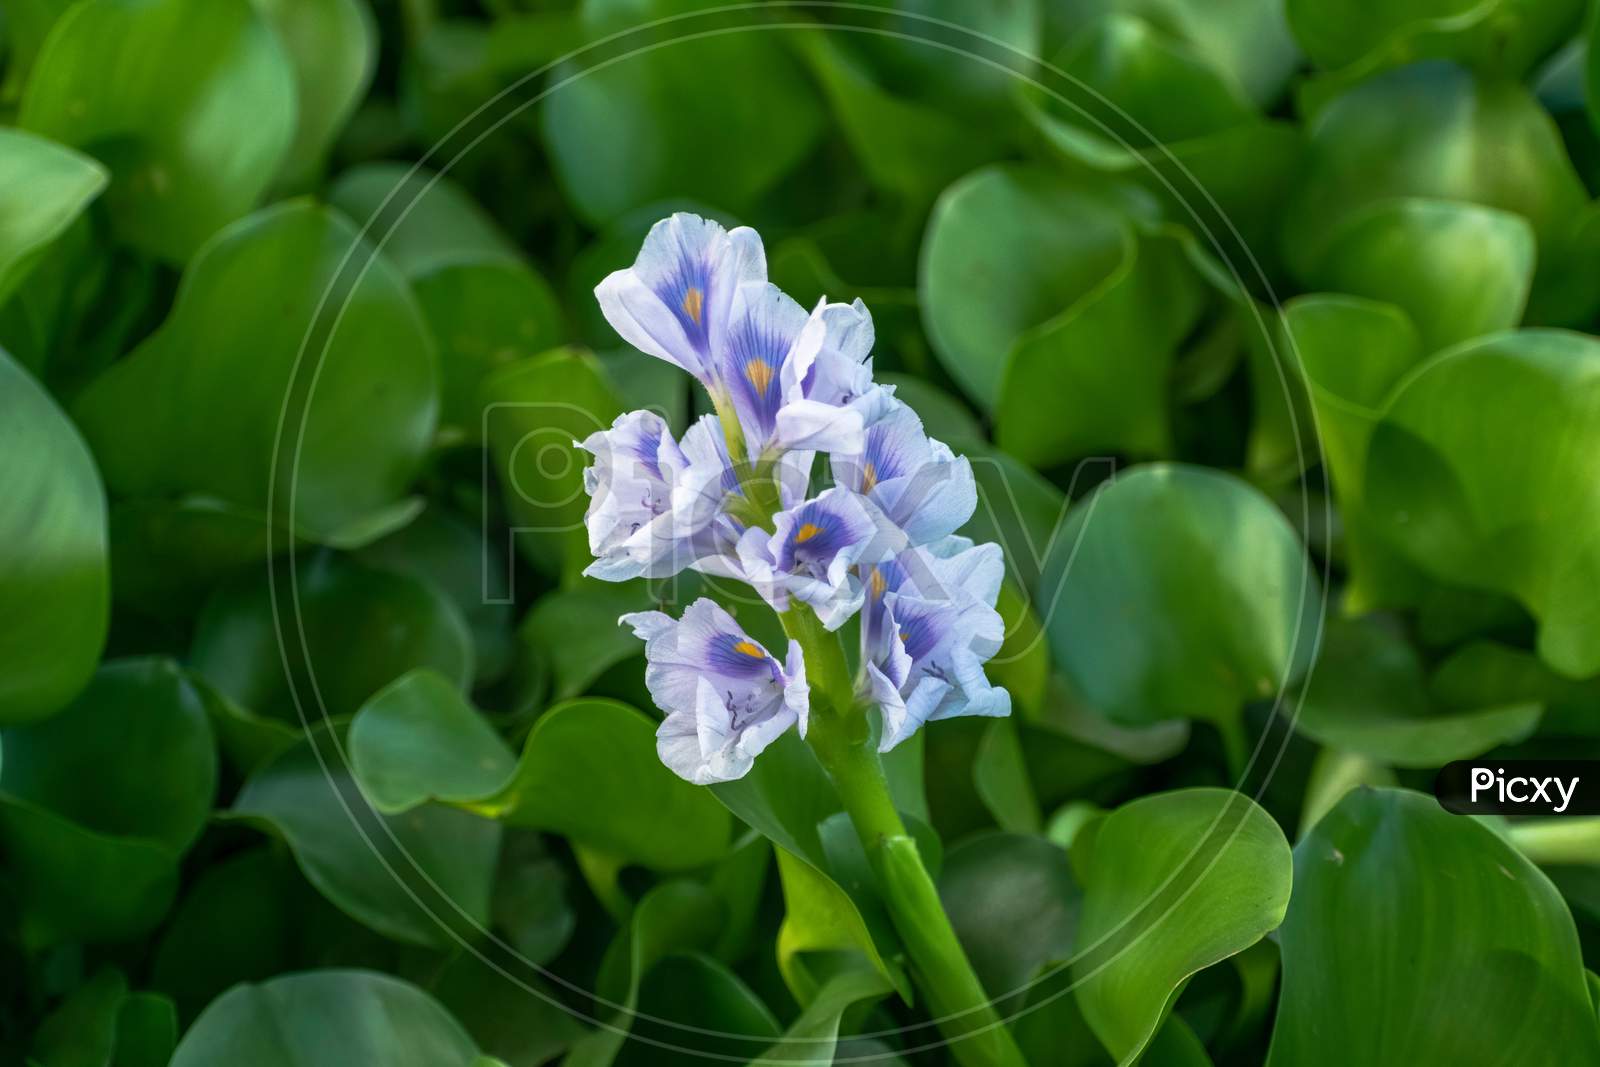 Eichhornia crassipes, commonly known as common water hyacinth